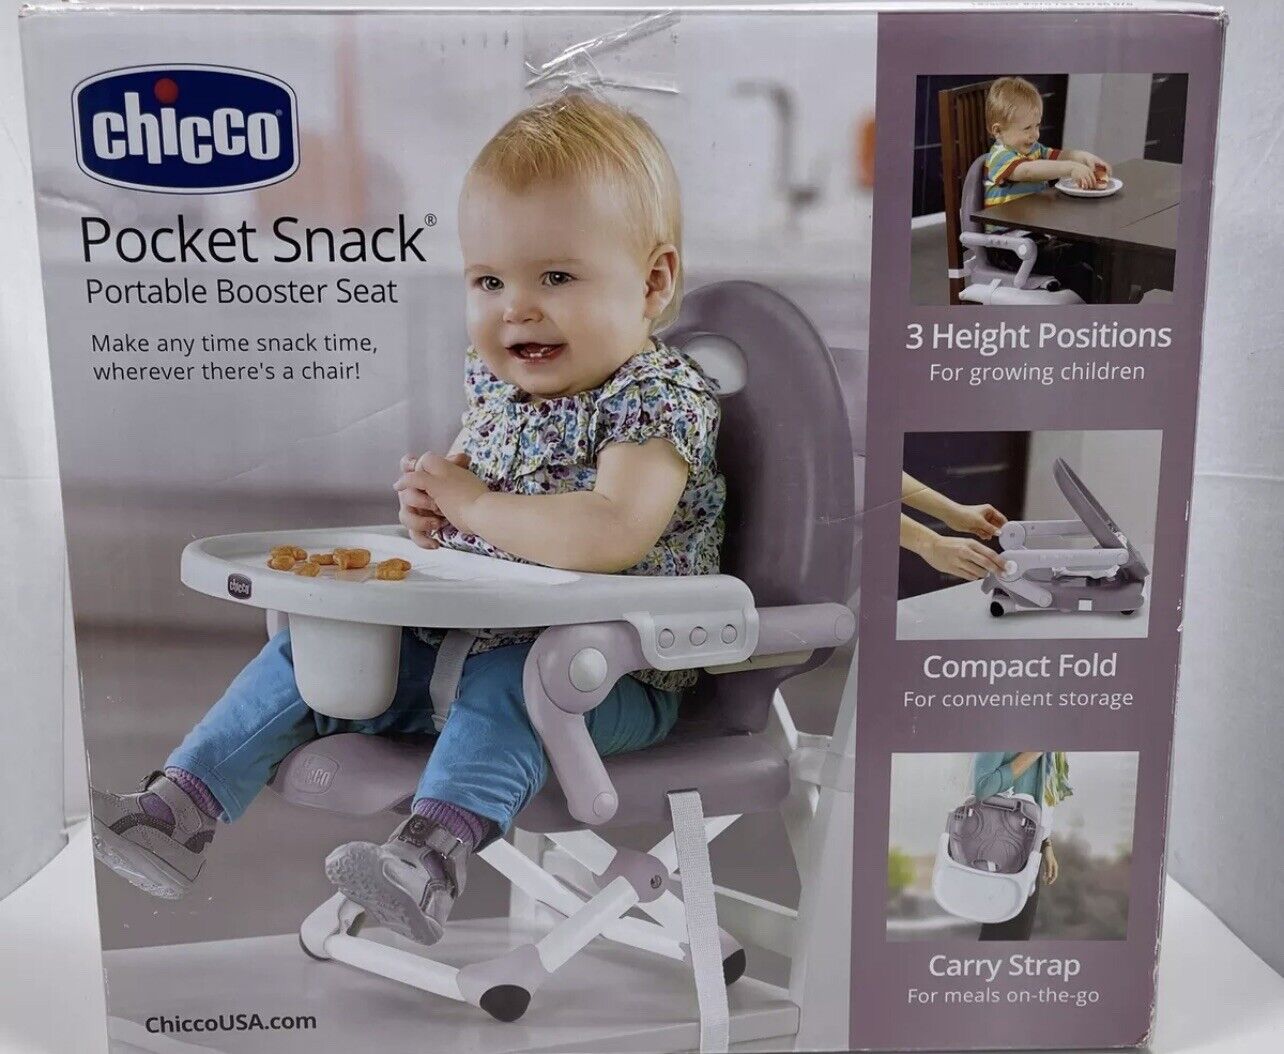 Chicco Pocket Snack Baby Todder Booster Seat, Portable And Safe New Without Box